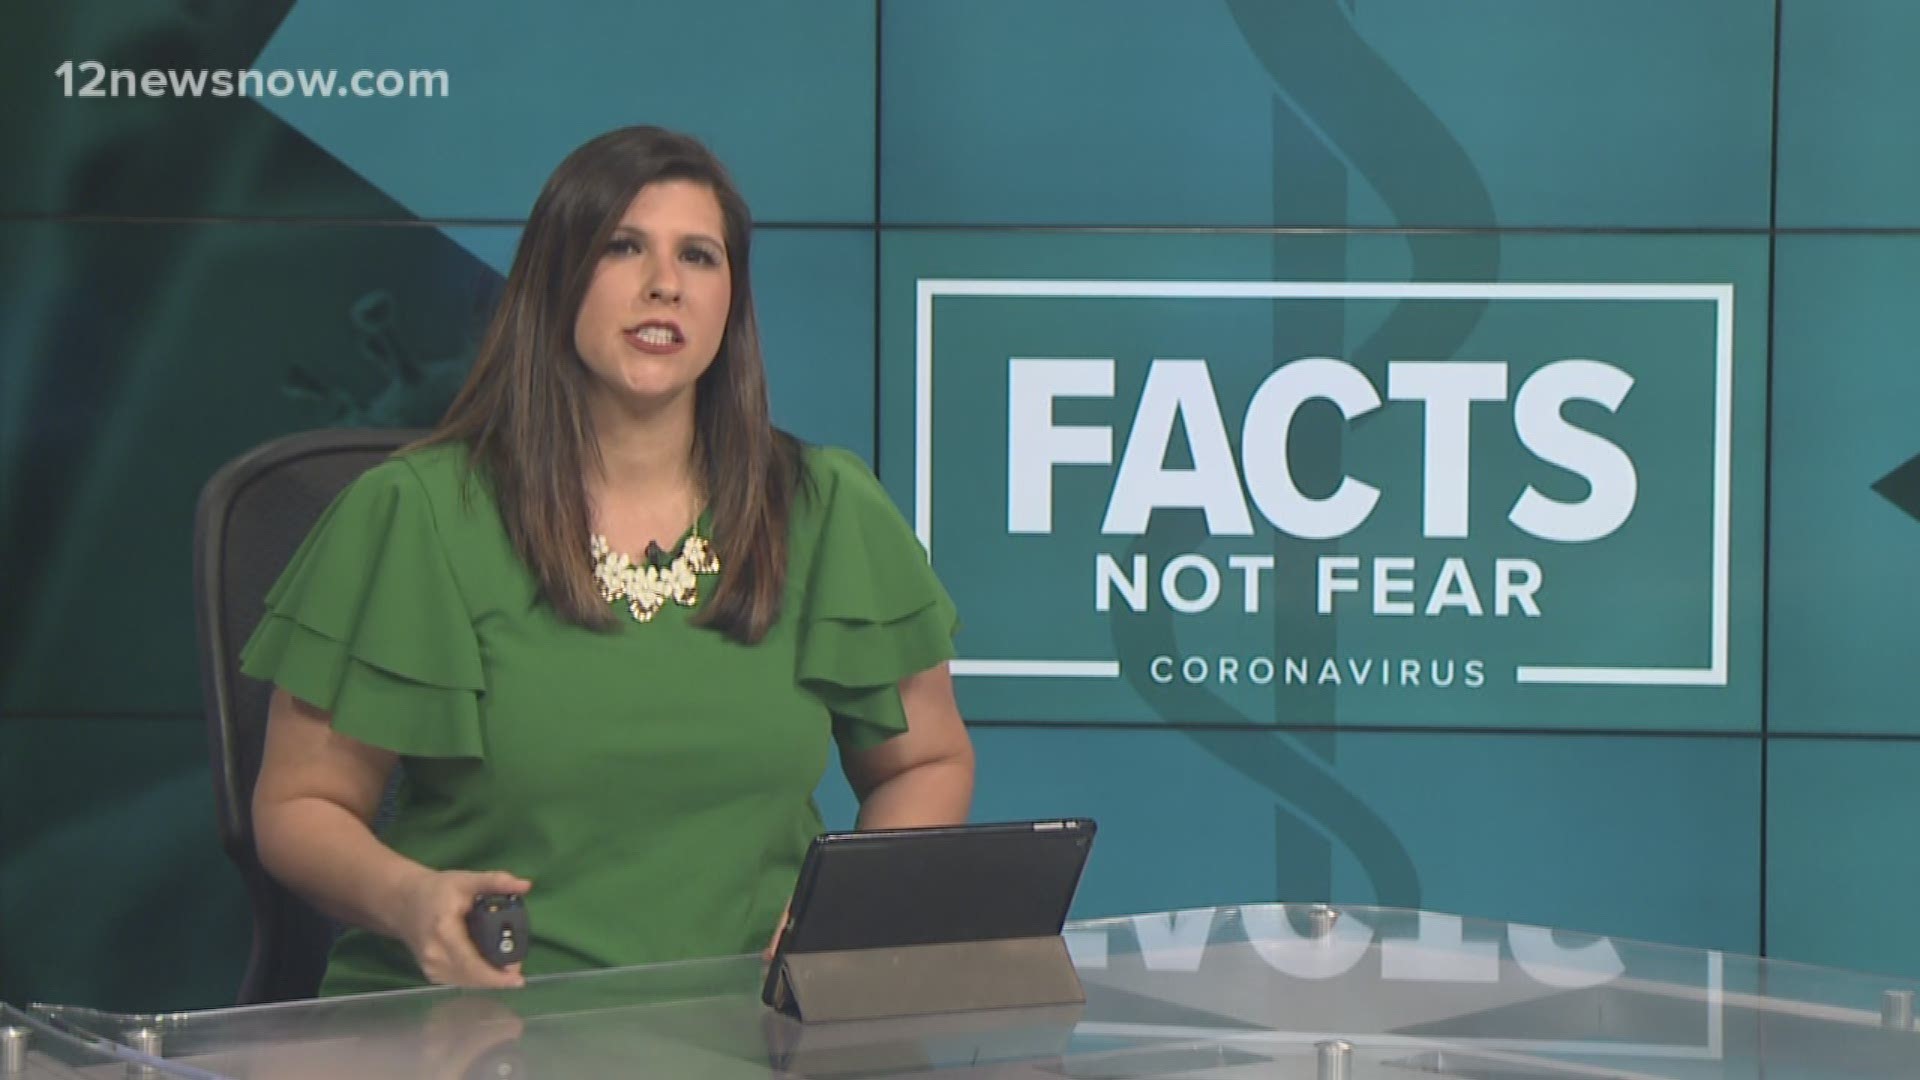 Chambers County officials say a woman between 50-60 years-old, who is quarantined at home in stable condition, is the county's first case of coronavirus.